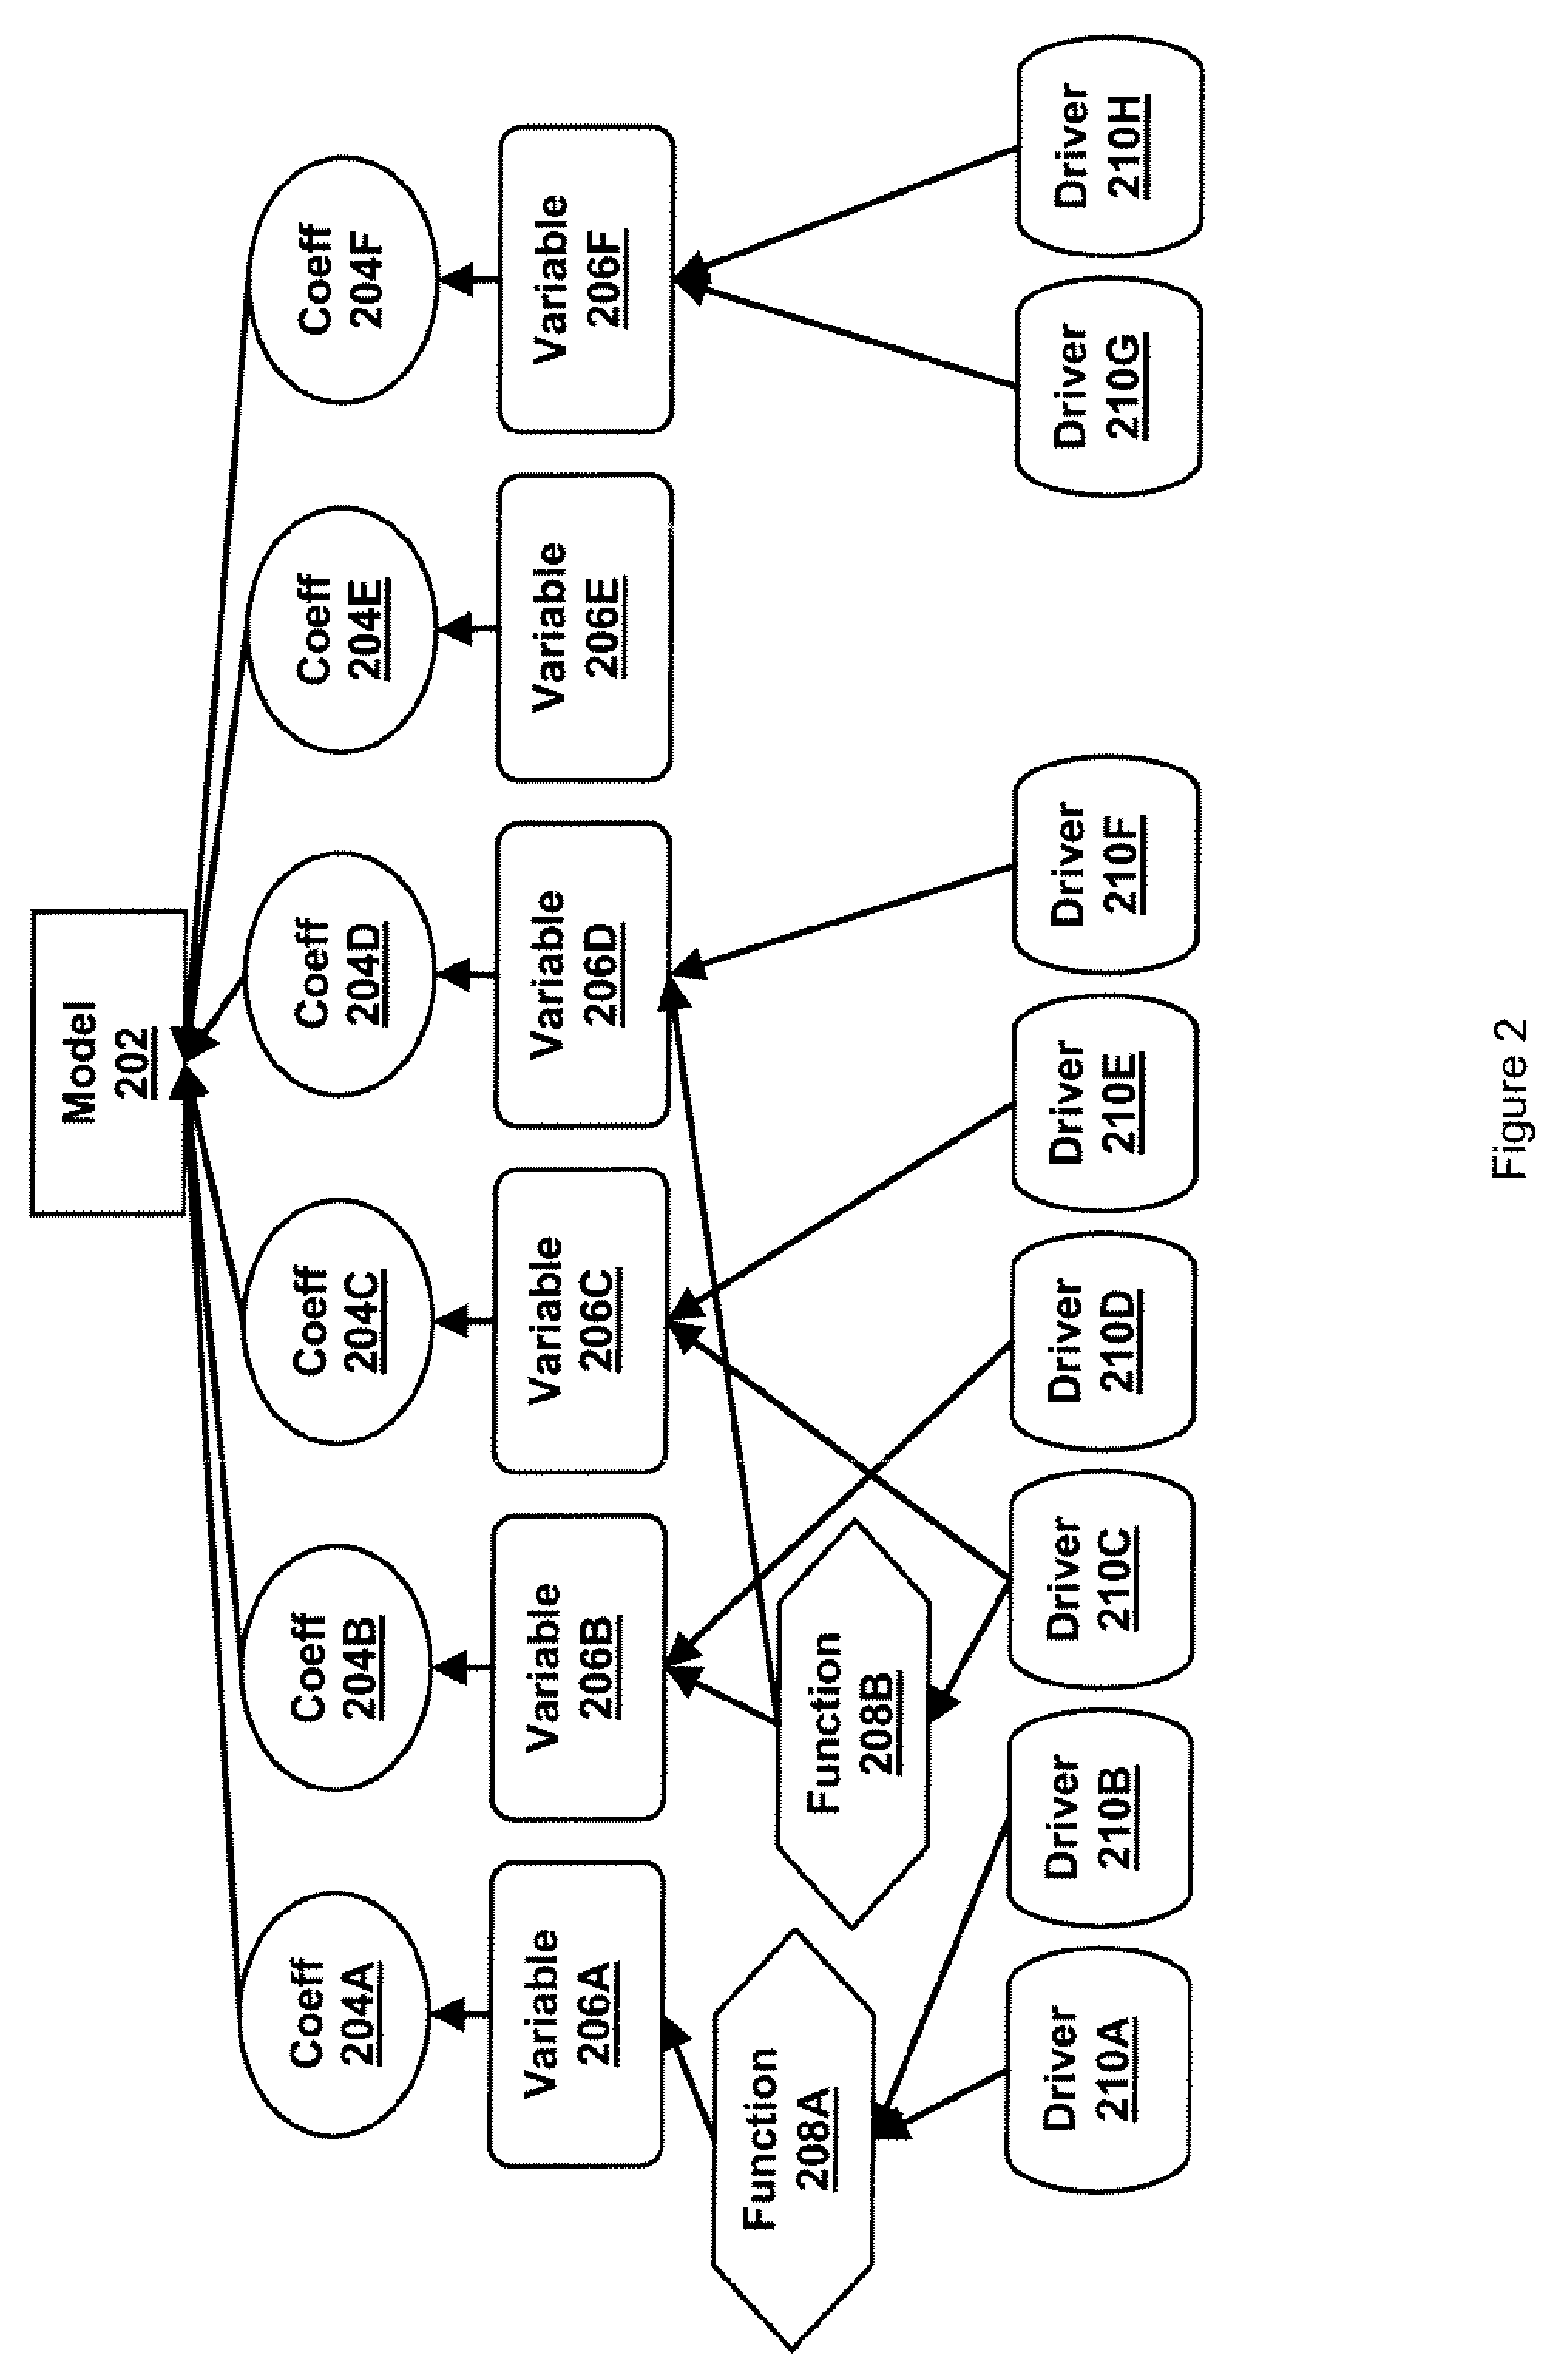 Method and apparatus for creating due-to reports for activities that may not have reference value